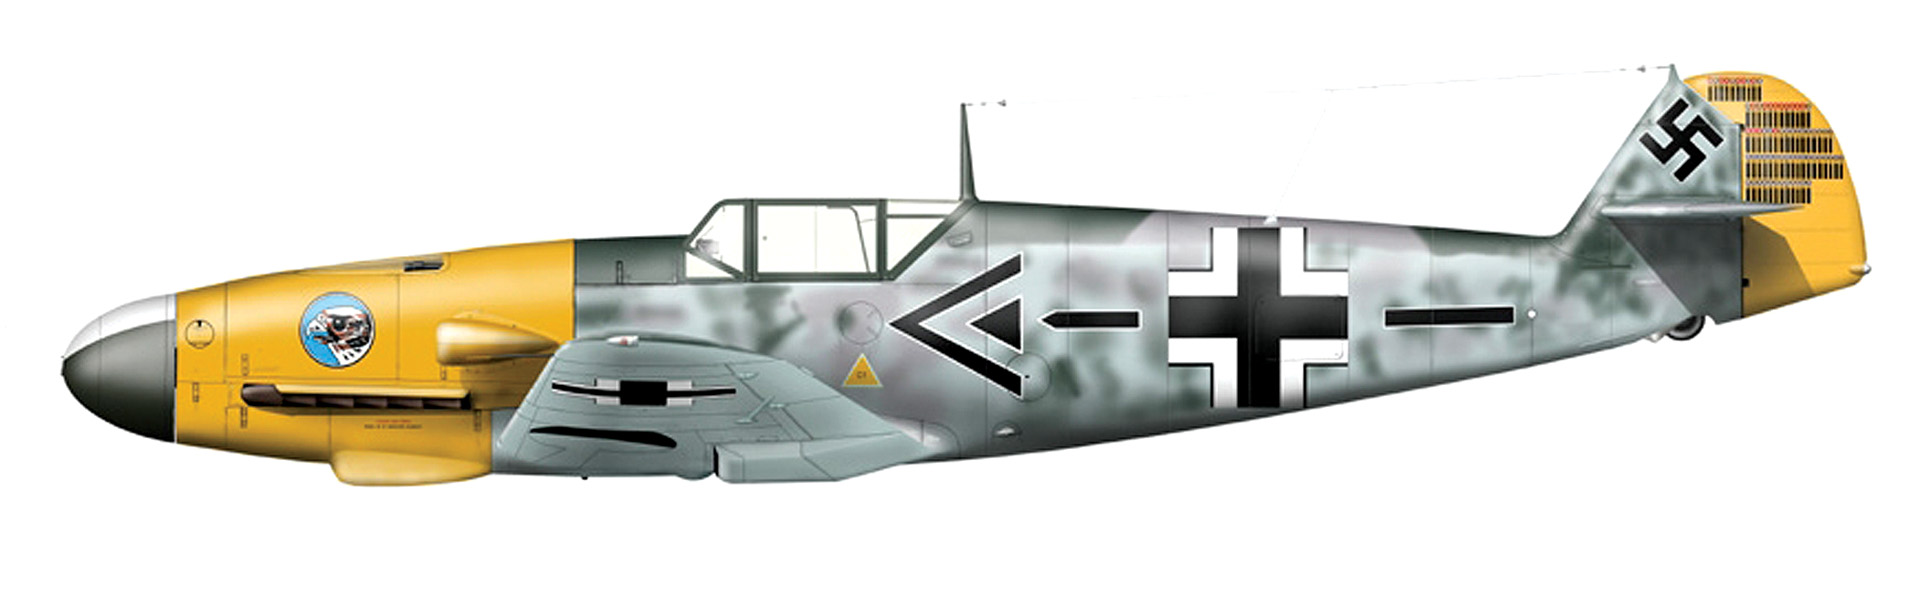 The Luftwaffe made frequent improvements to the Messerschmitt Bf 109 throughout World War II to ensure it could compete with Allied fighter aircraft.